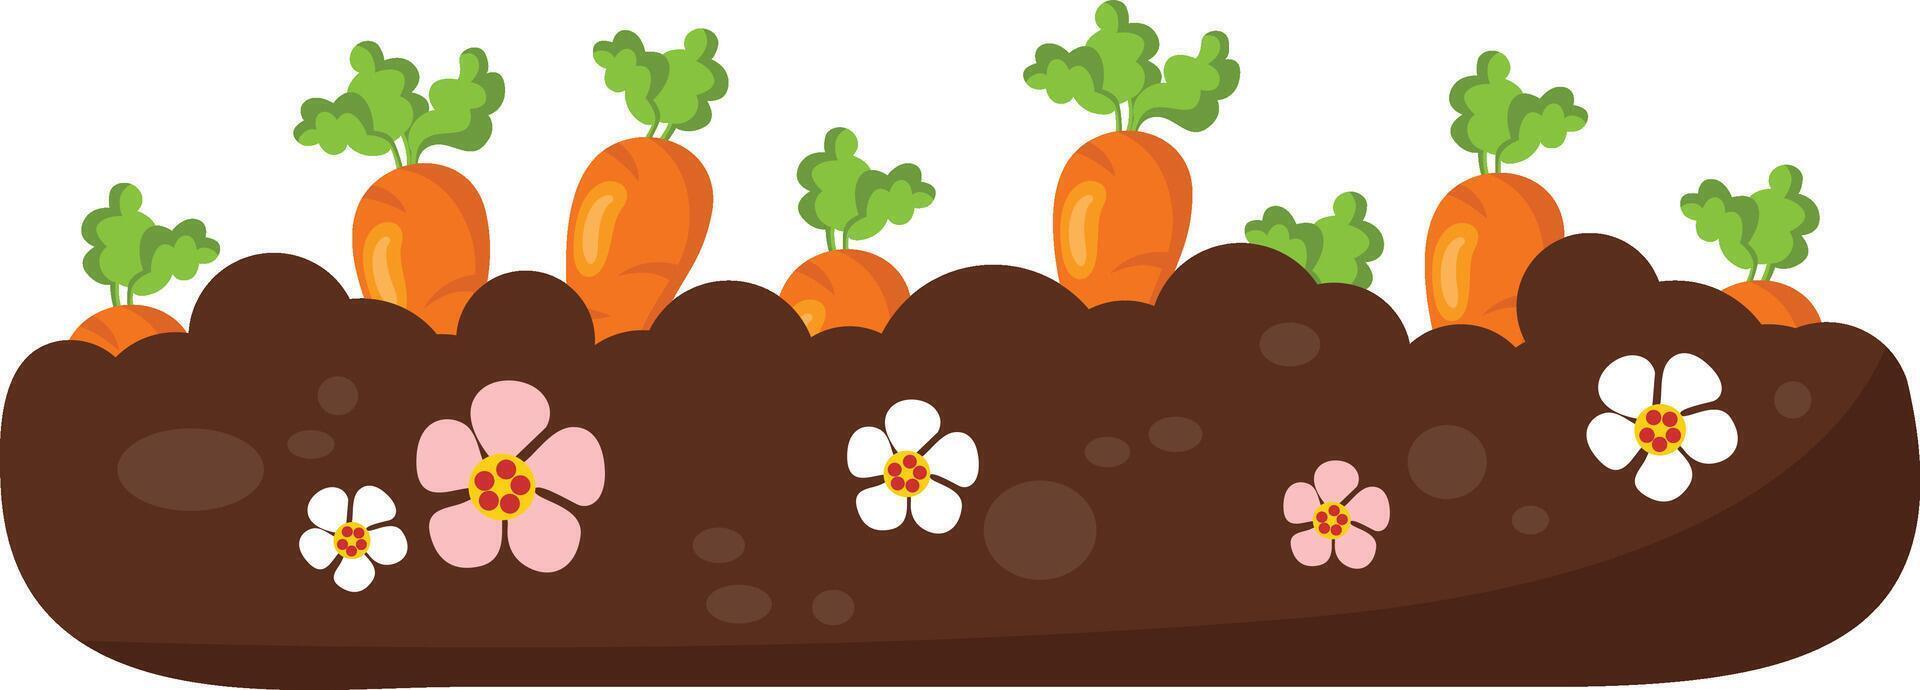 Carrots growing in the dirt in the backyard vector